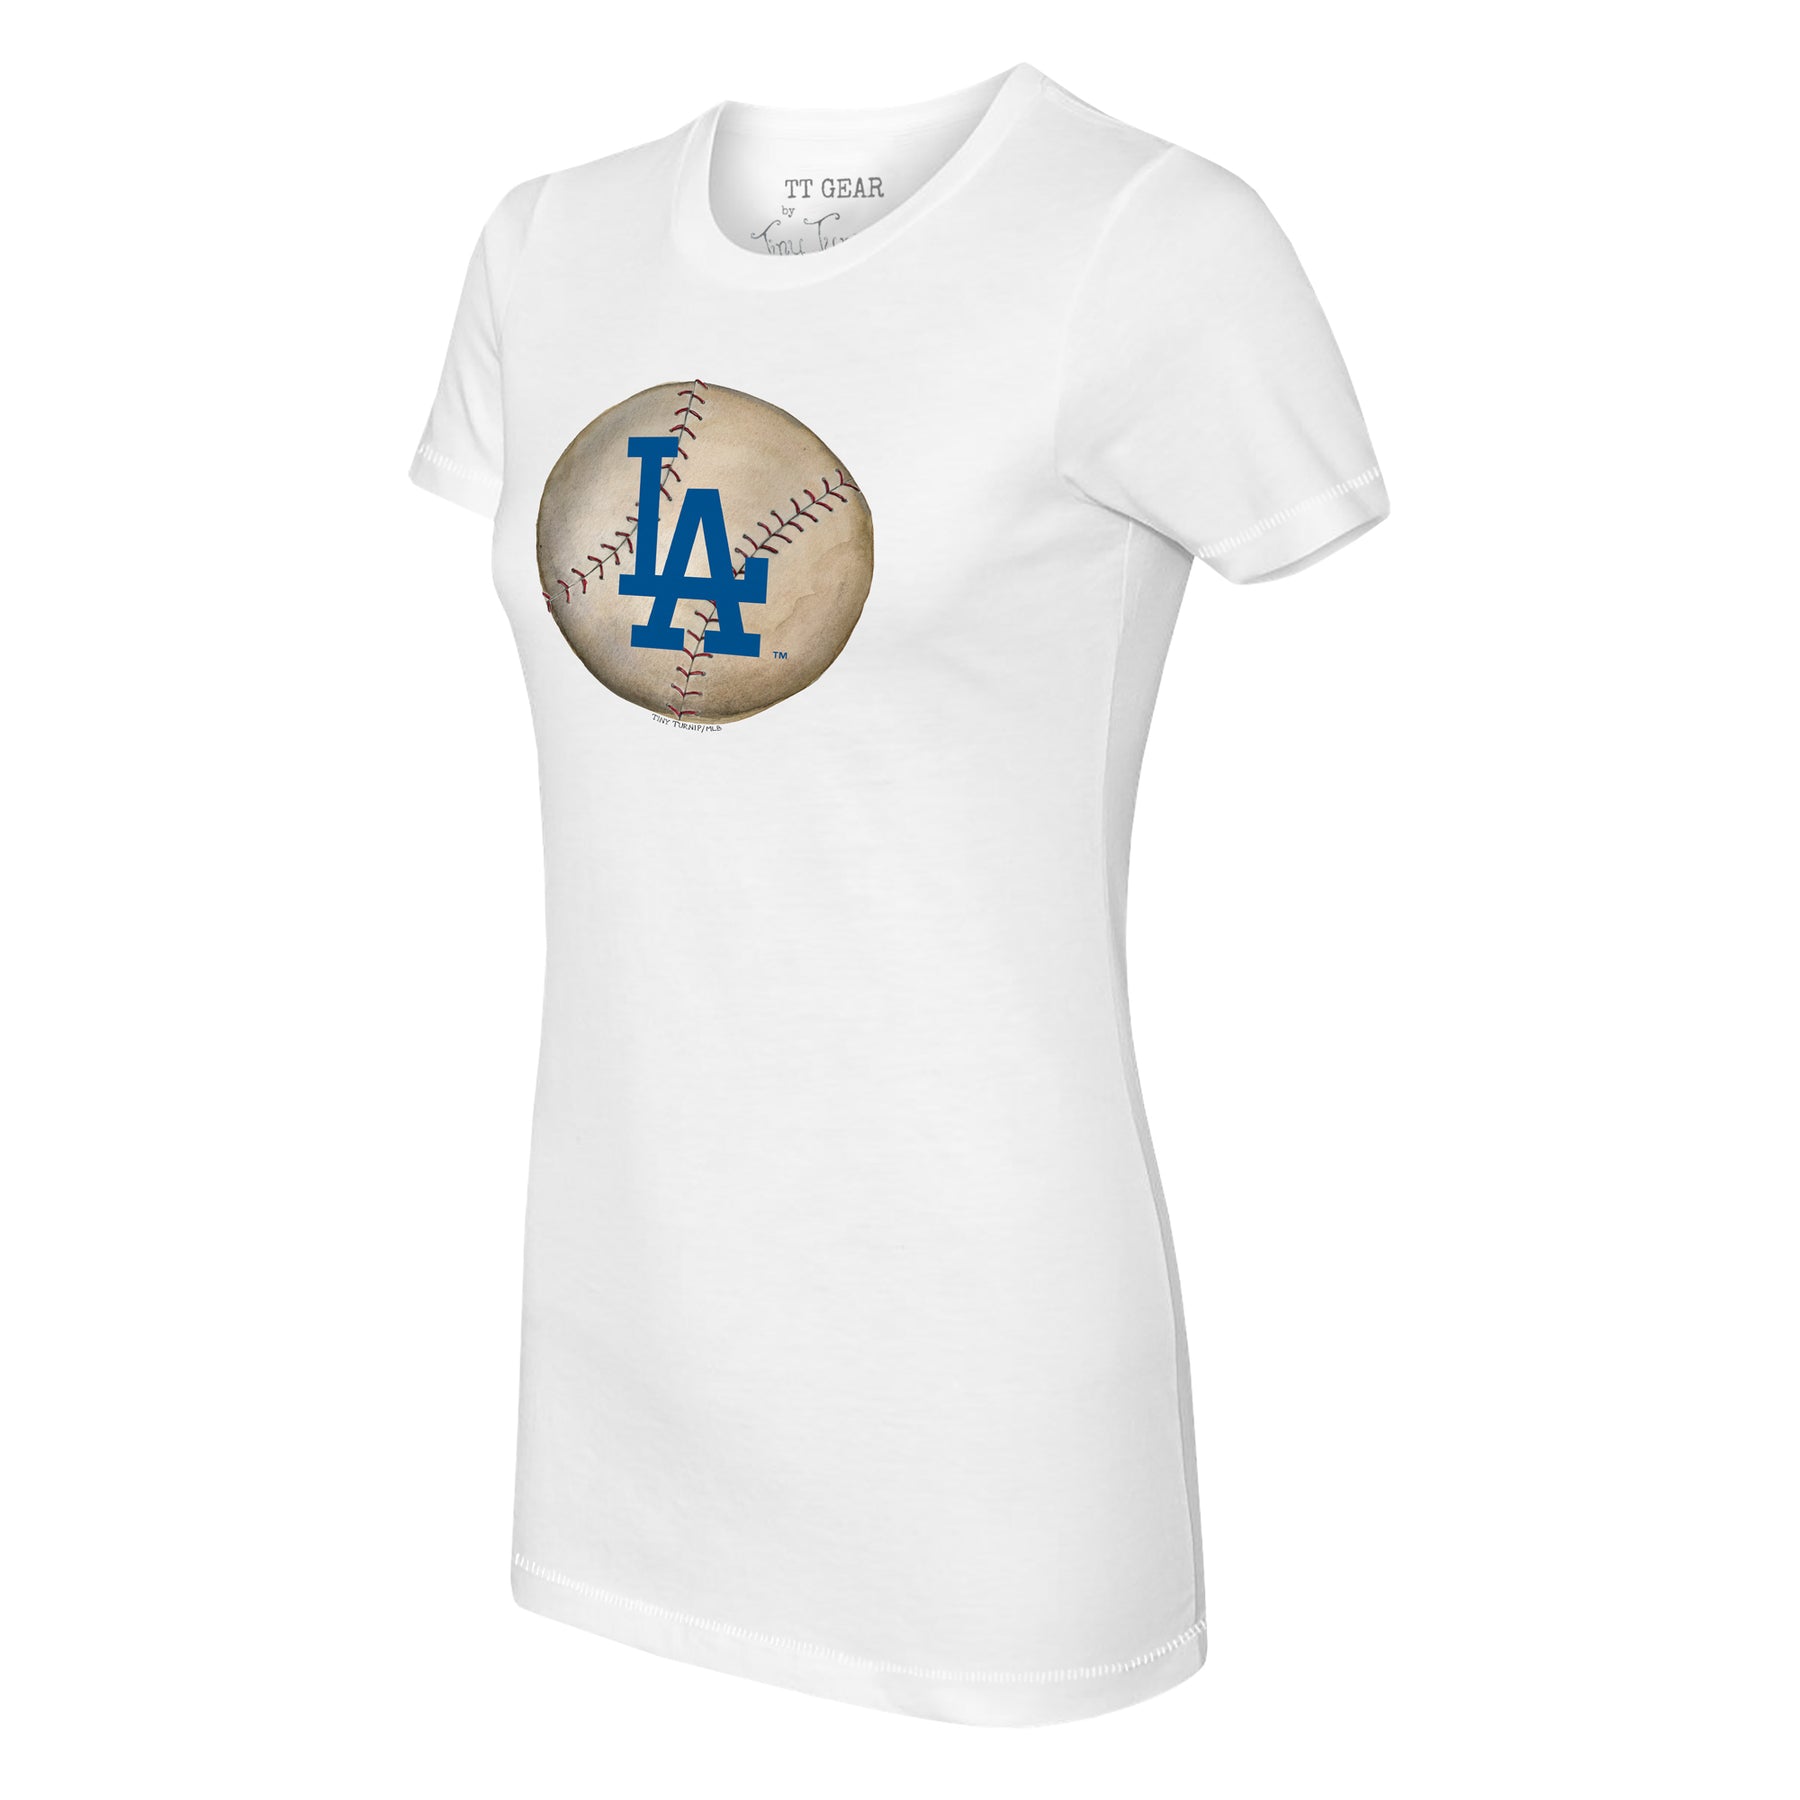 Los Angeles Dodgers Stitched Baseball Tee Shirt Women's 3XL / White